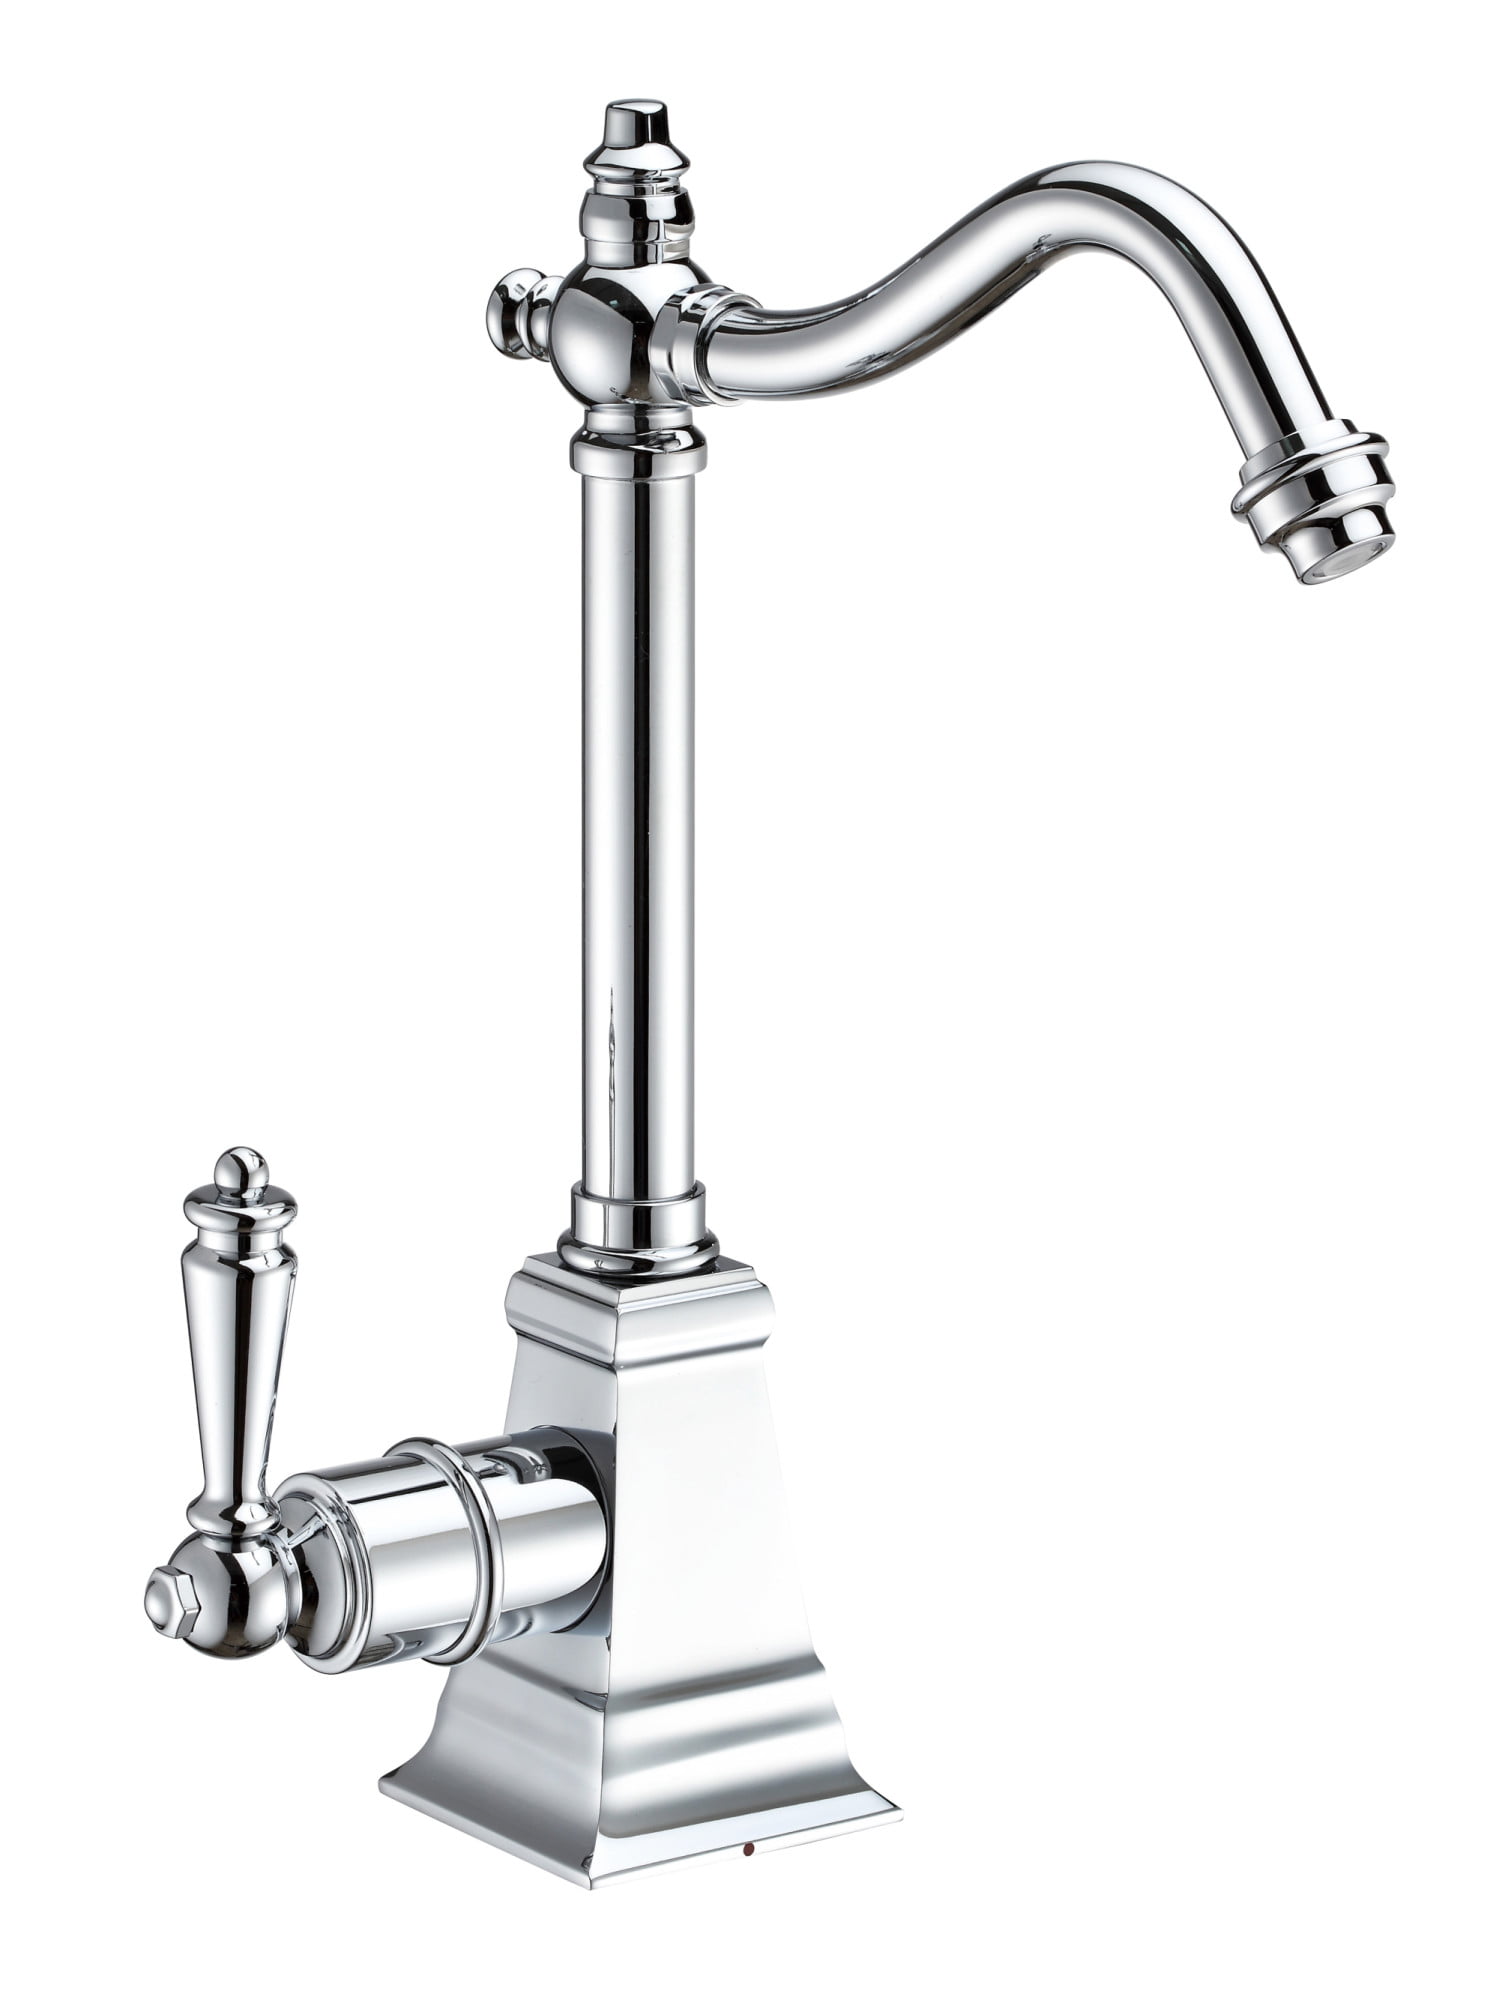 Point of Use Instant Hot Water Drinking Faucet - Polished Chrome -  LivingQuarters, LI2751342